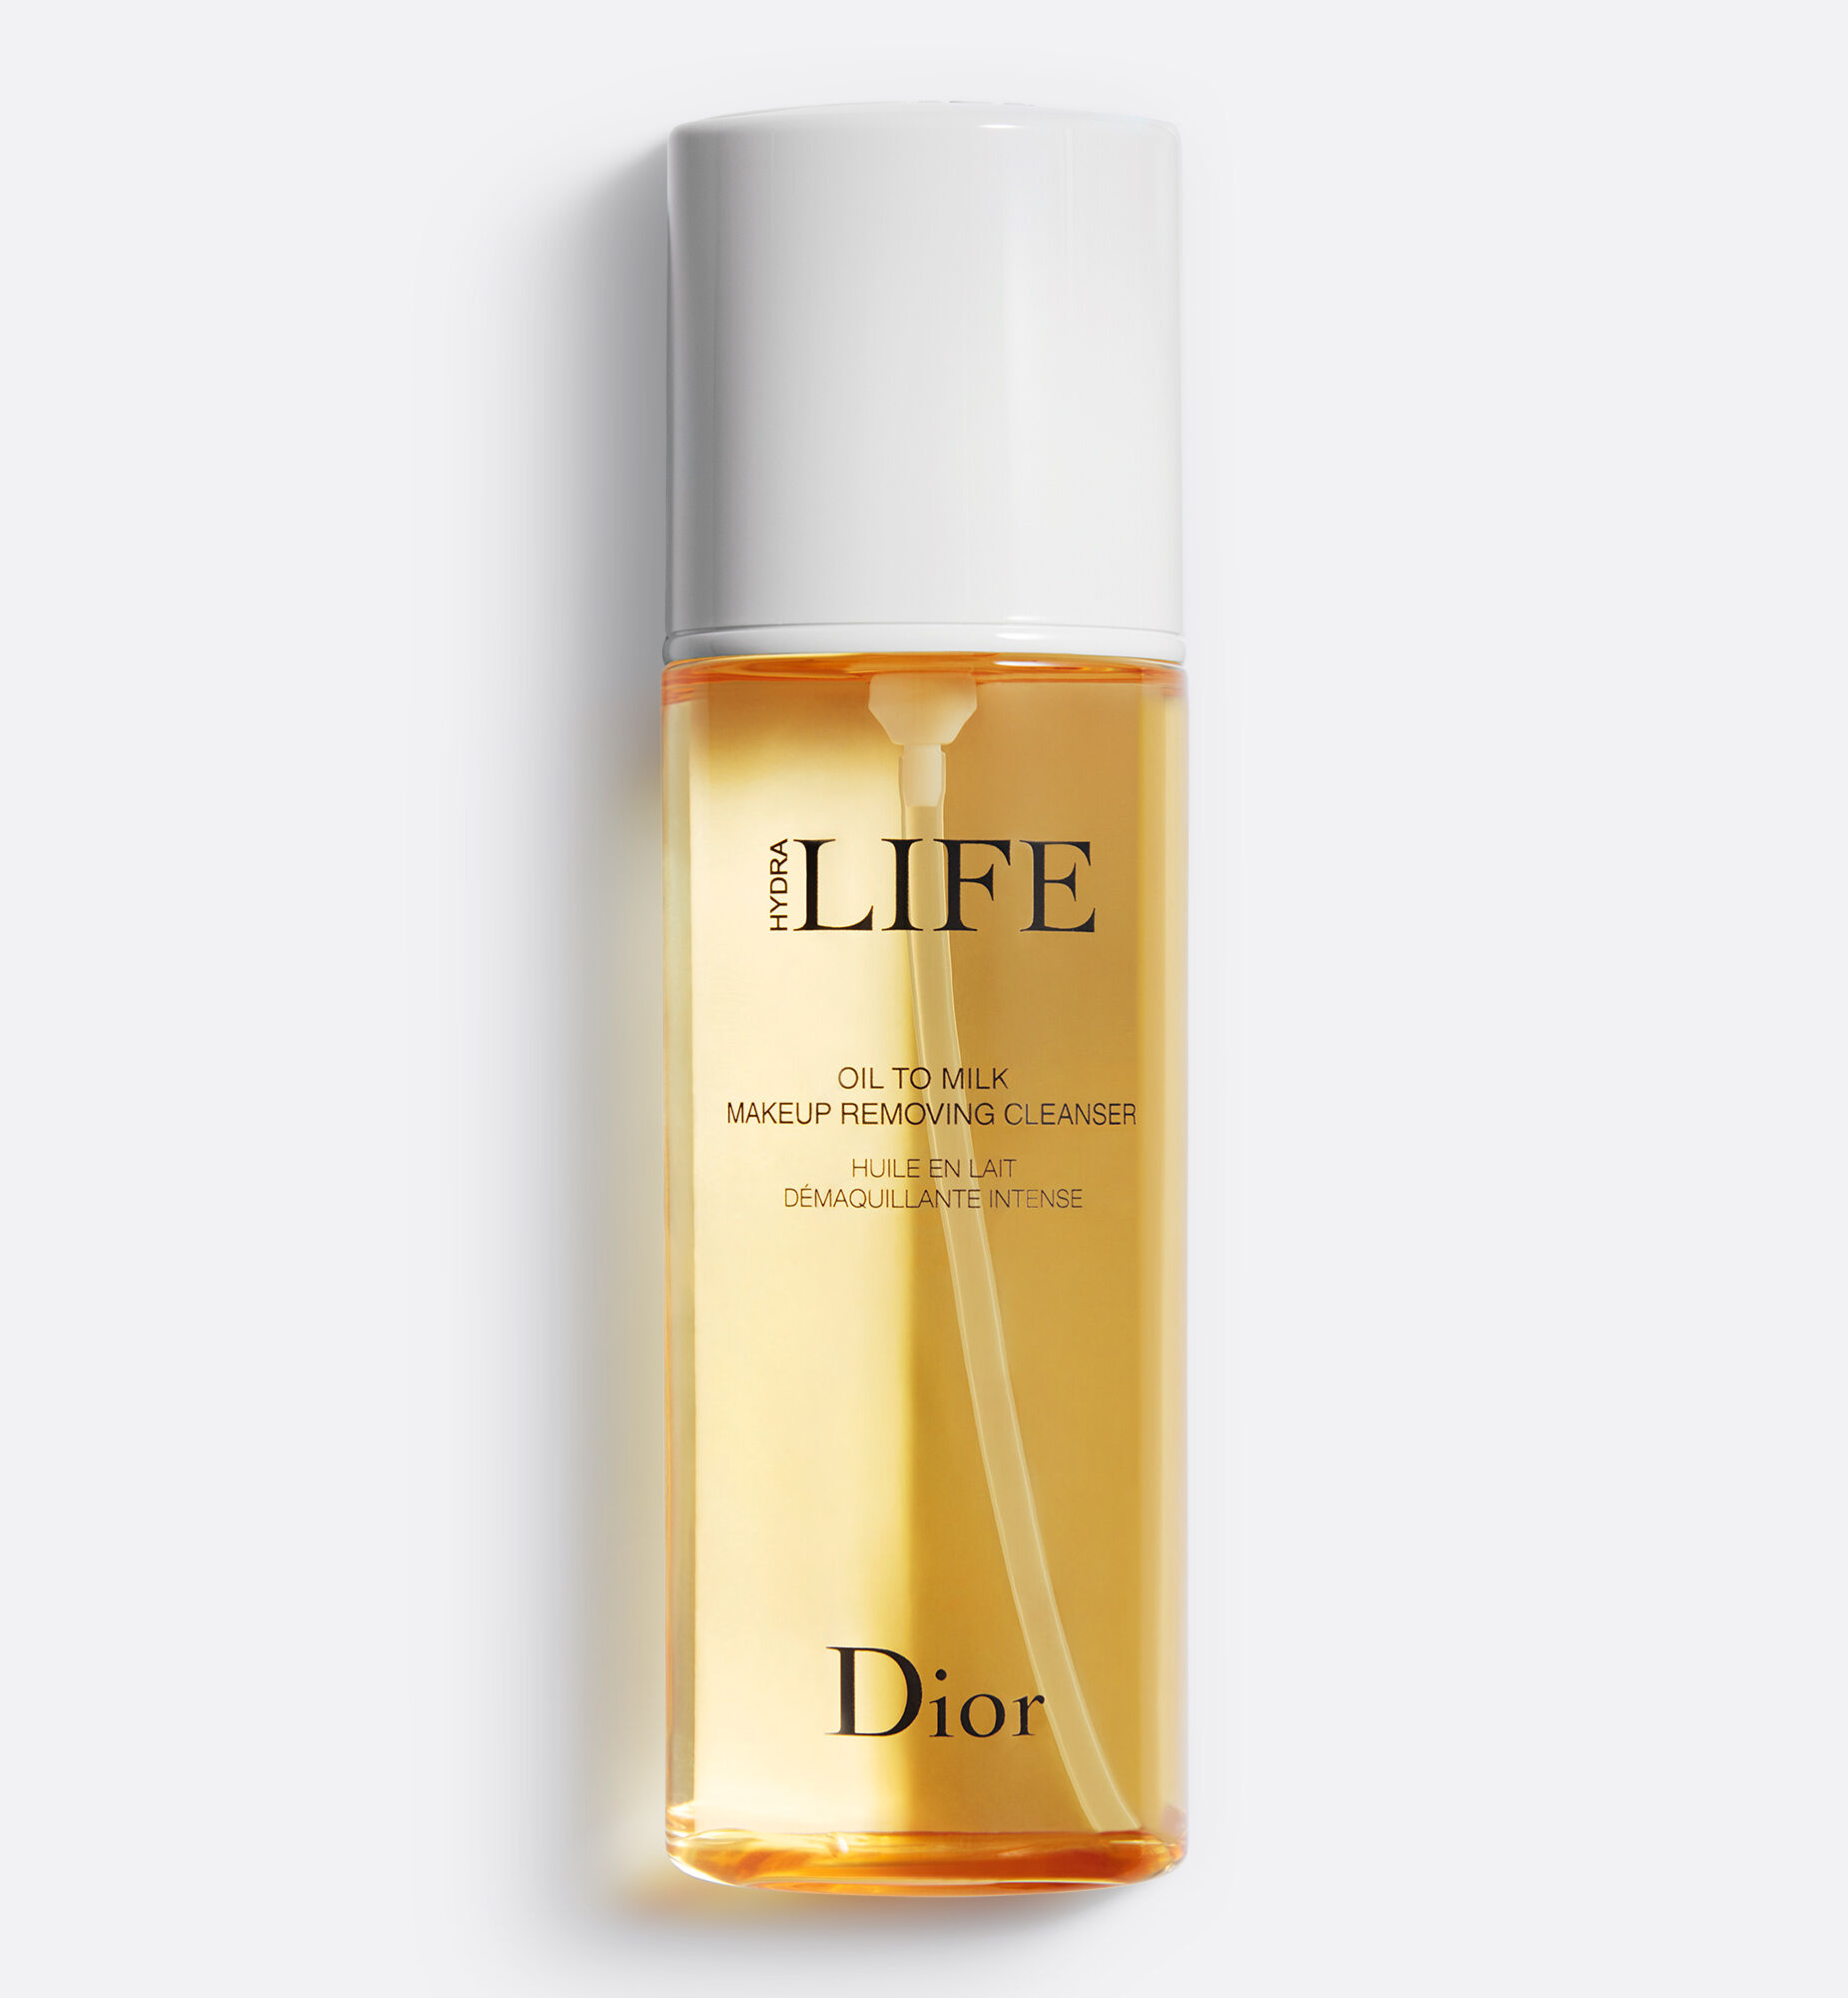 Dior Hydra Life Oil To Milk Makeup Removing Cleanser  islamiyyatcom